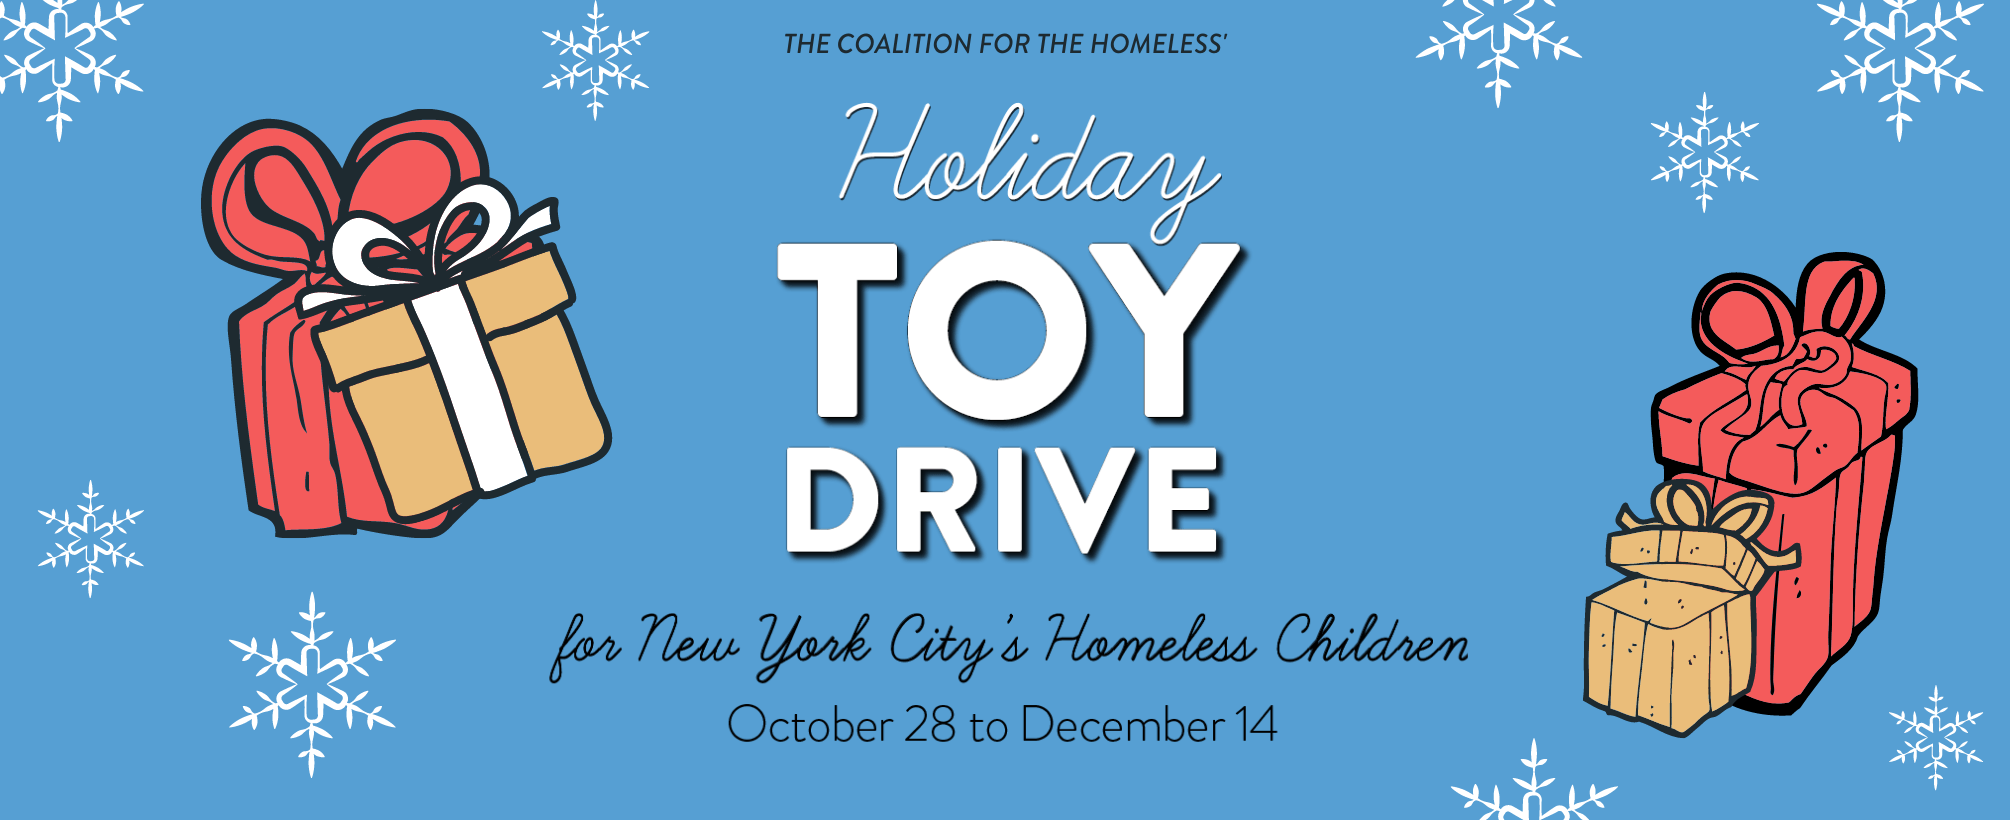 Text on a blue background reads The Coalition for the Homeless' Holiday Toy Drive for New York City's Homeless Children